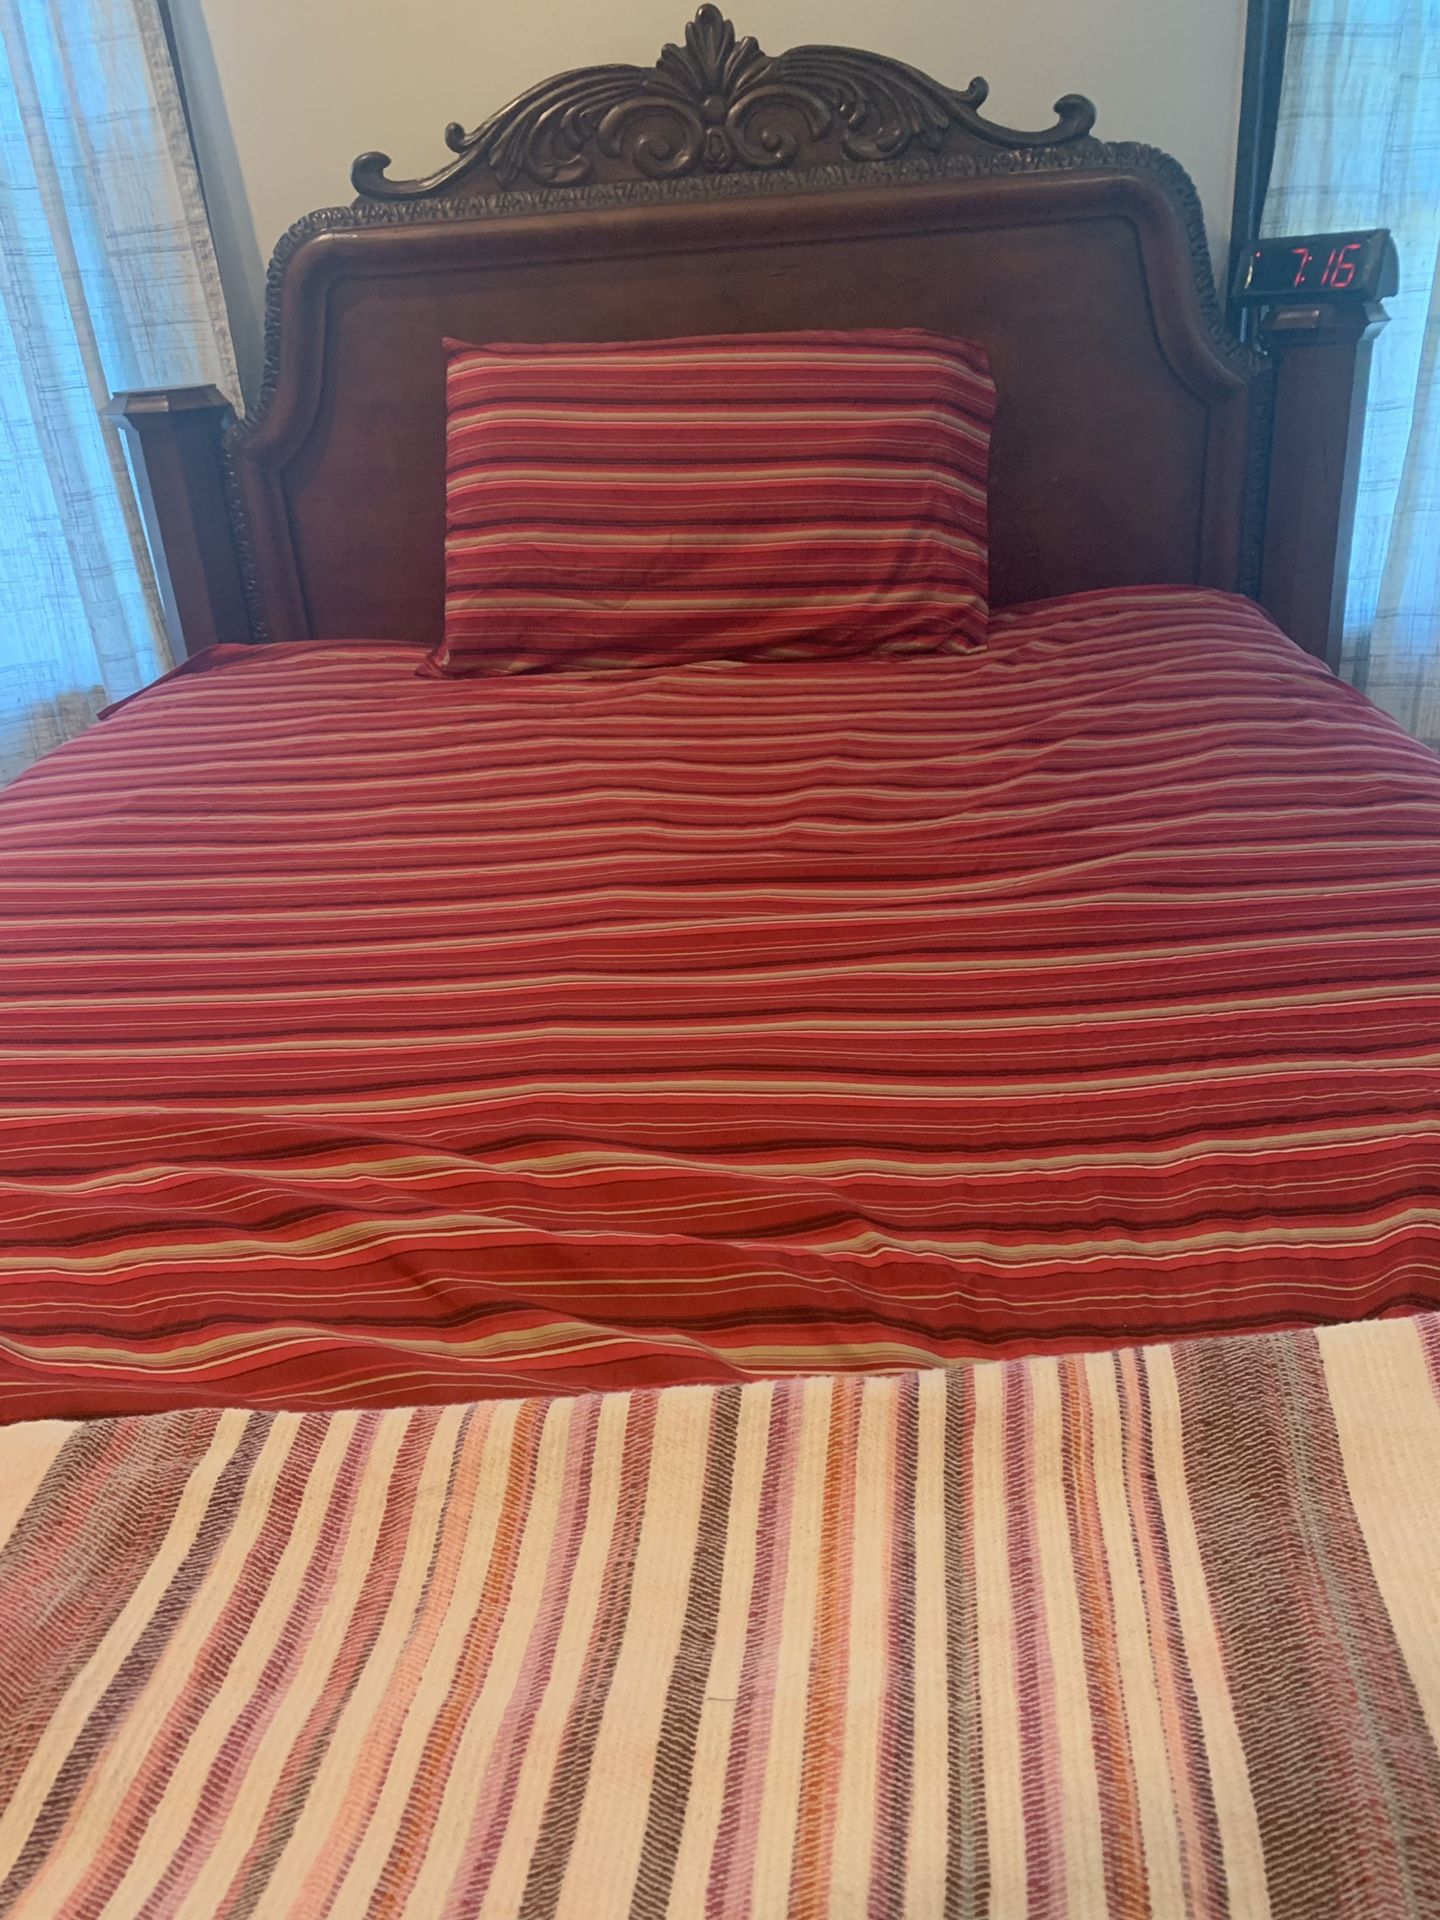 Queen size bed frame. Very good condition, only needs one slat.